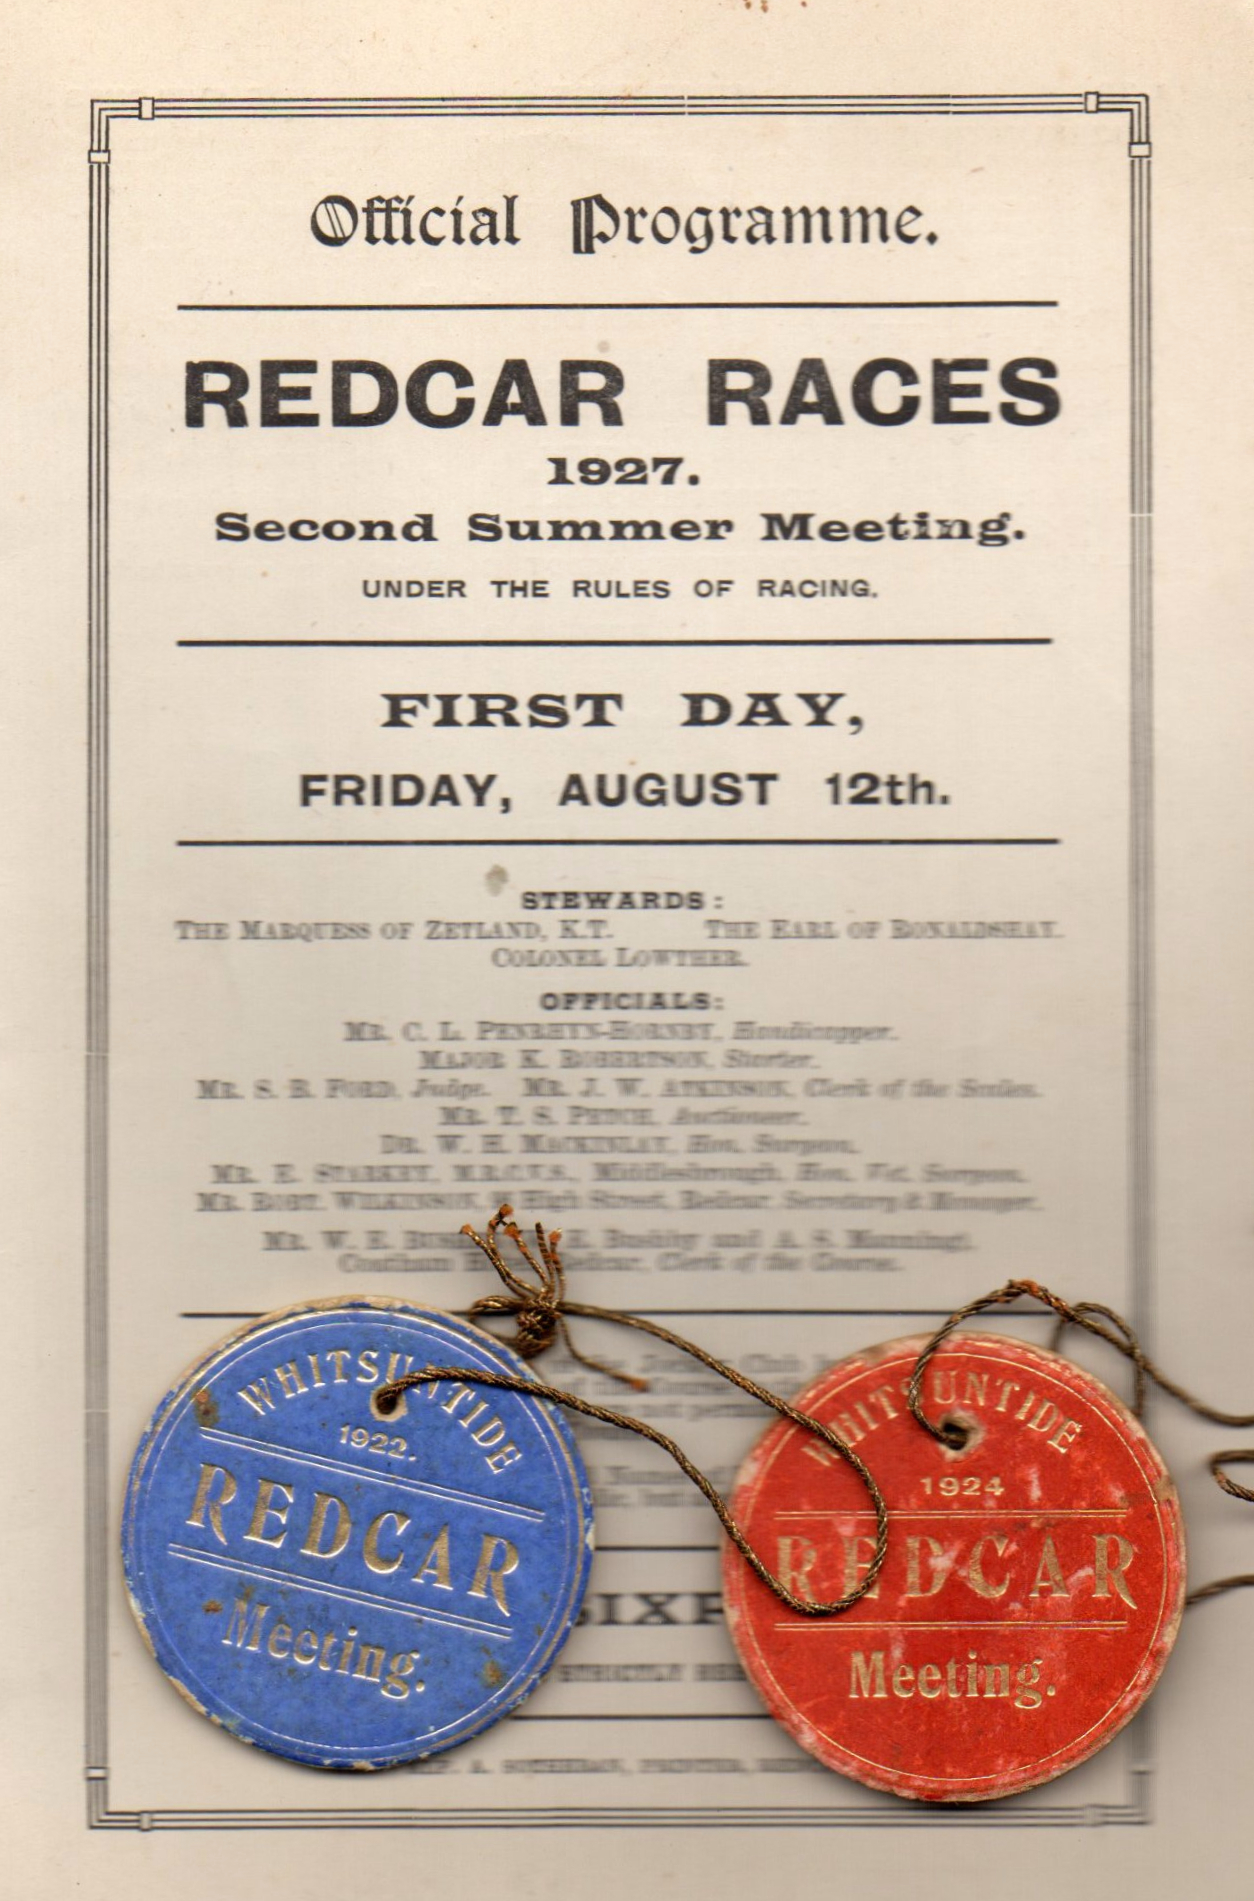 A programme from 1927, courtesy of Stephen Dixon of Redcar, who has supplied many of our old pictures